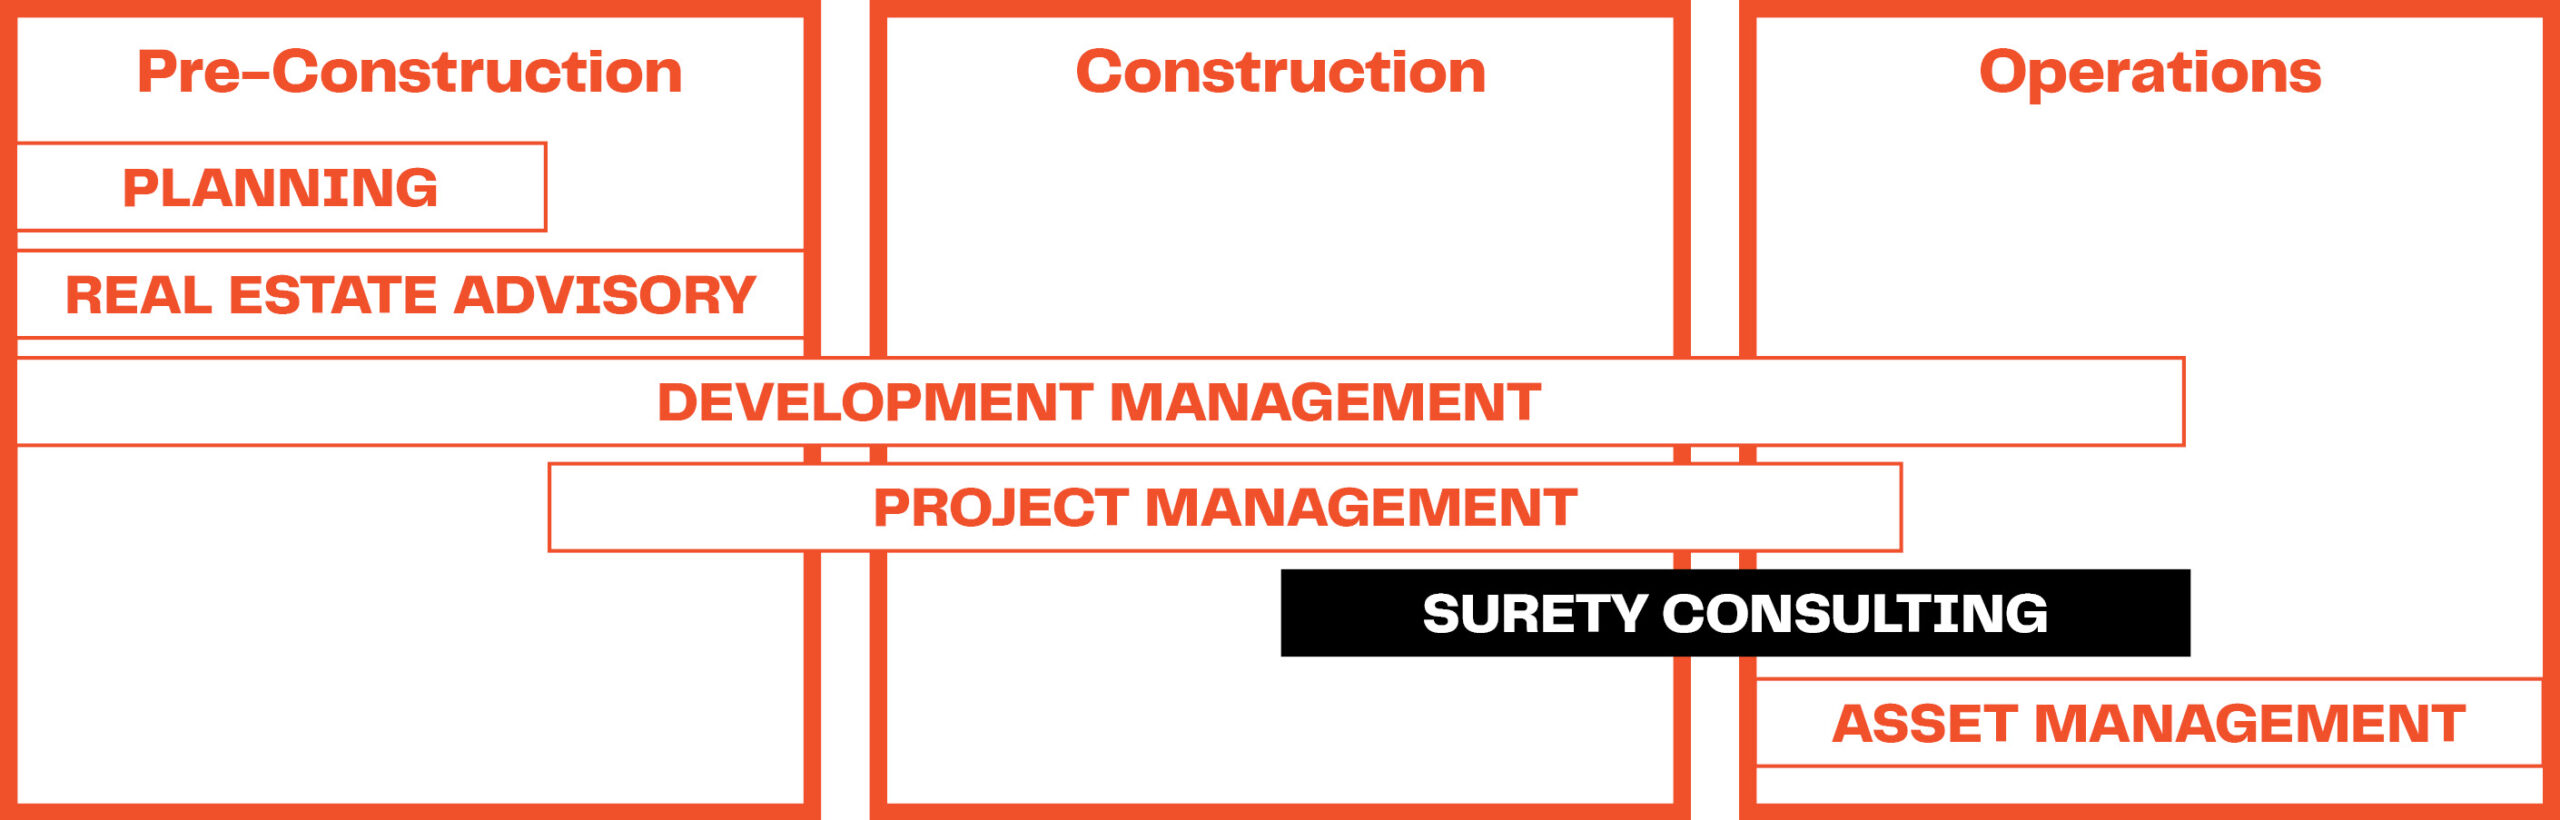 Services Timeline - Surety Consulting